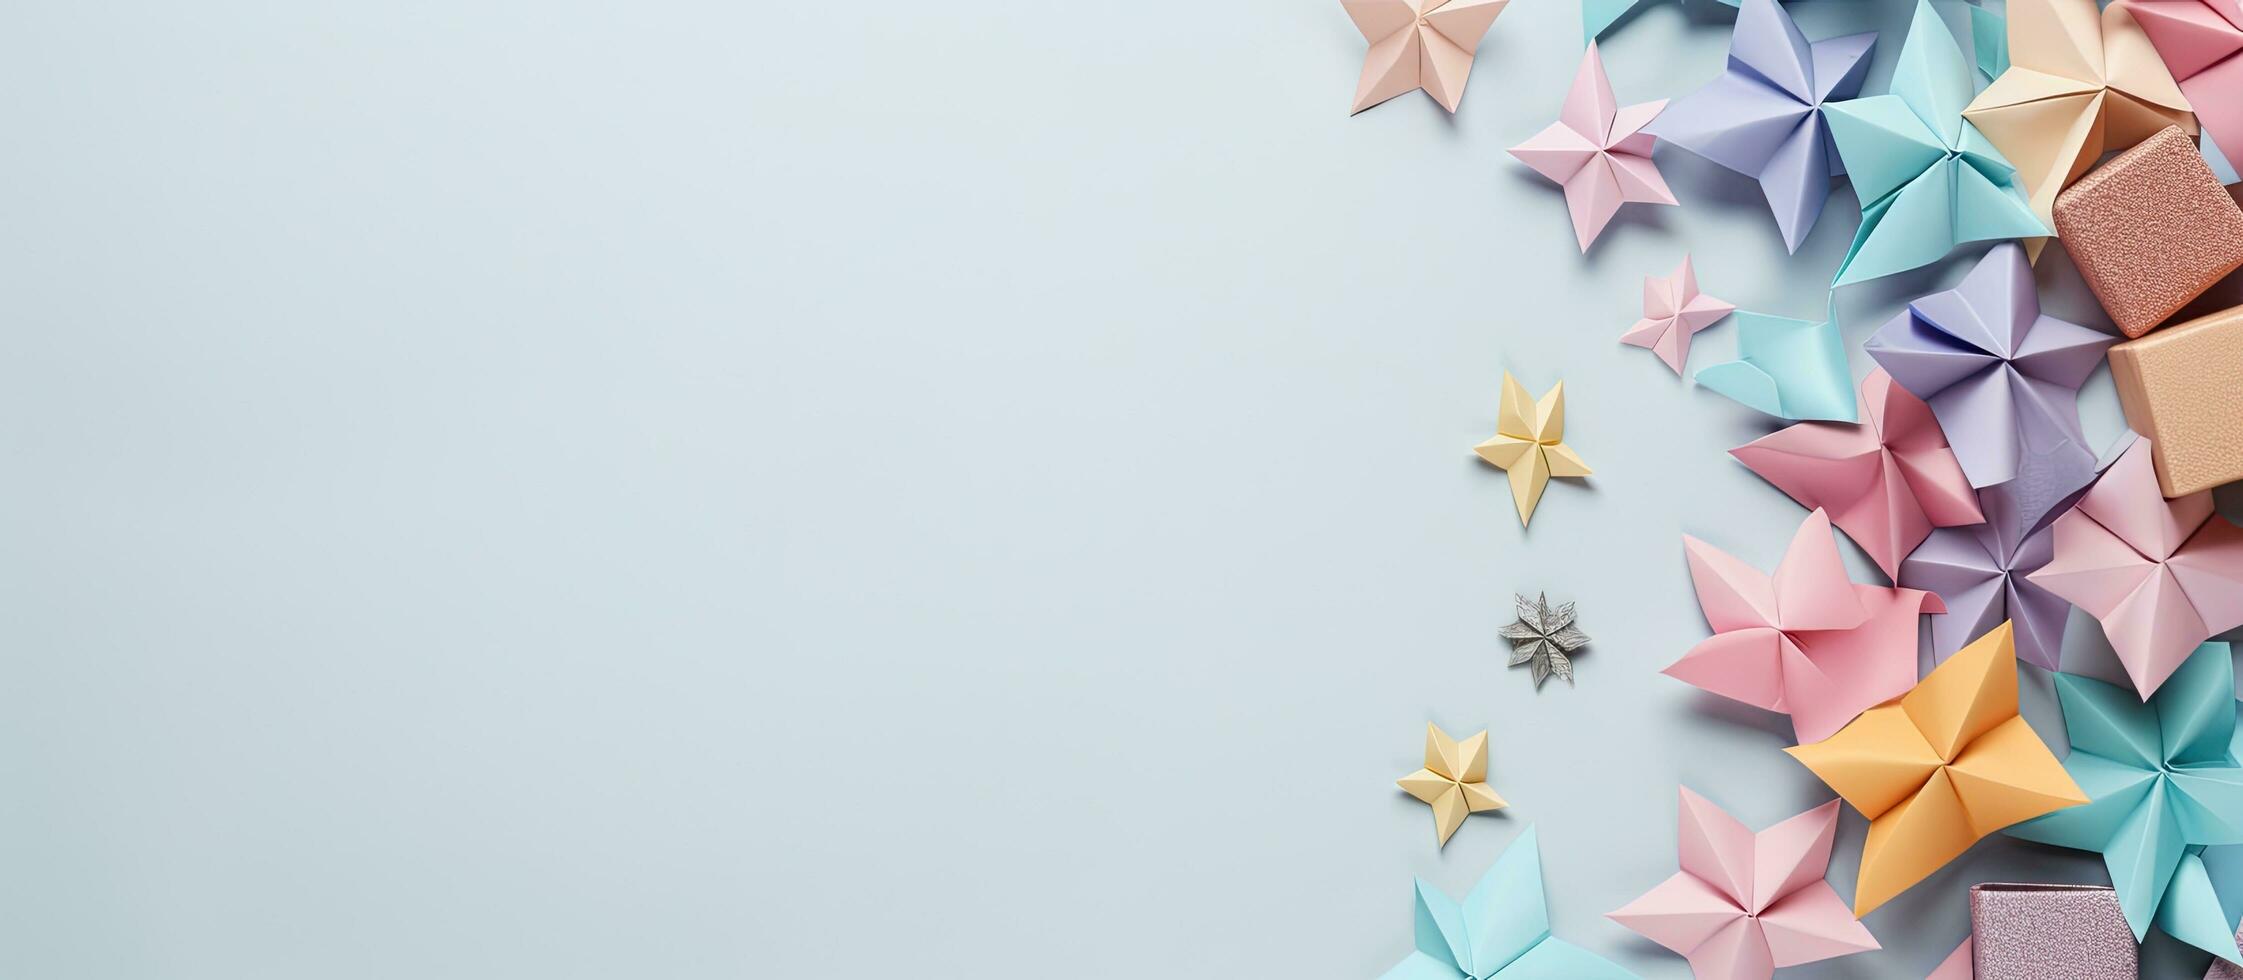 Photo of origami stars on a vibrant blue background with copy space